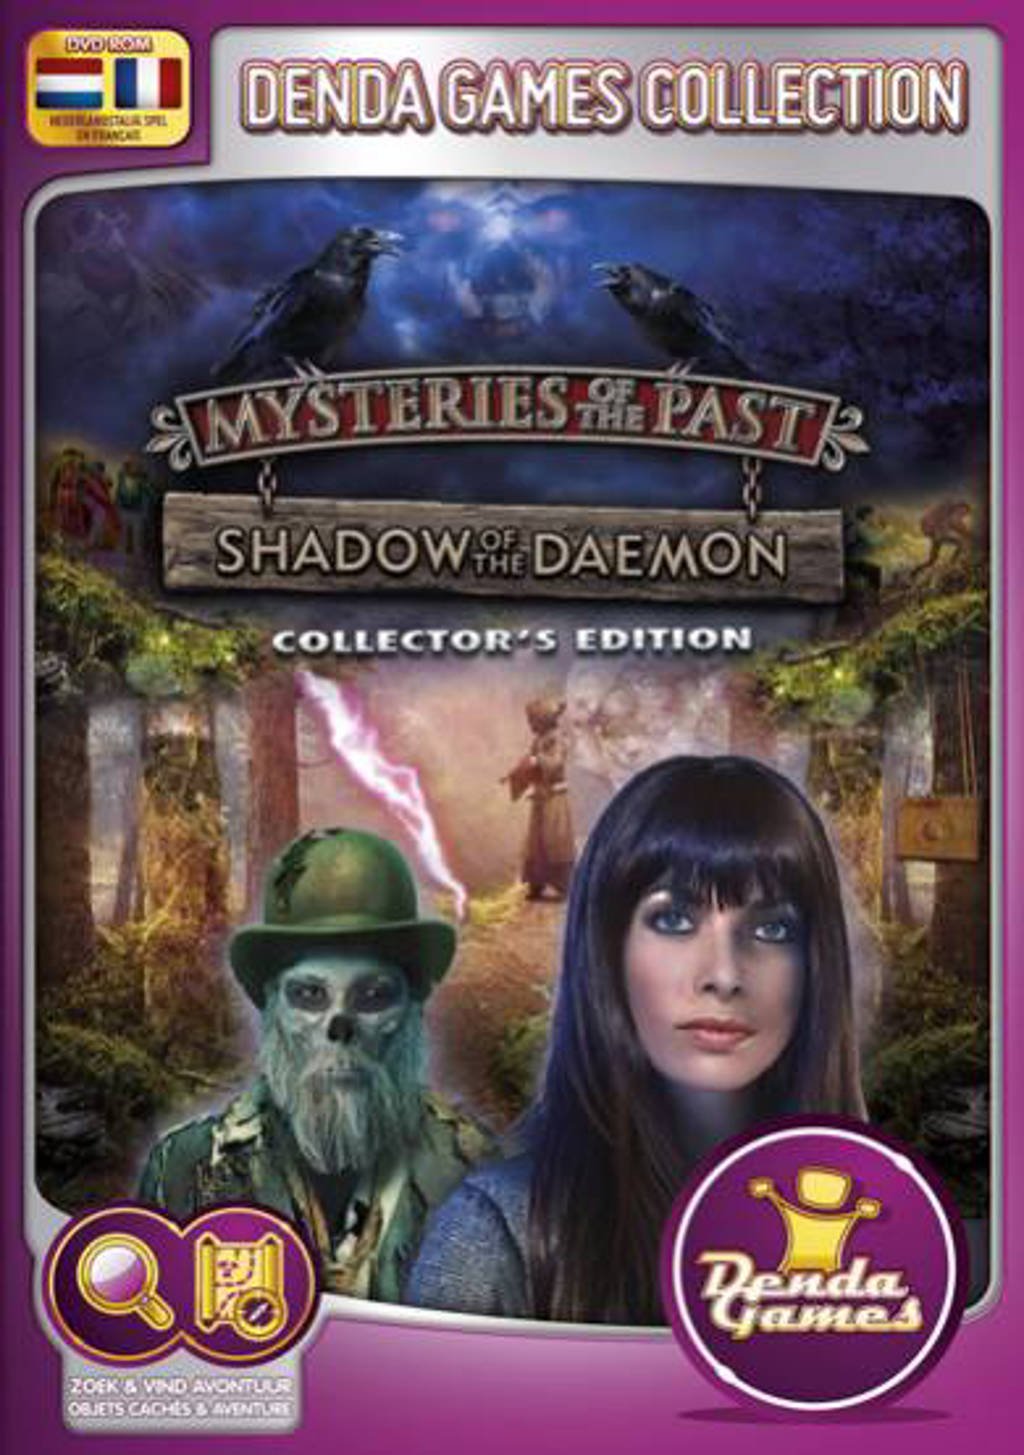 Mysteries of the past - Shadow of the deamon (Collectors edition) (PC)